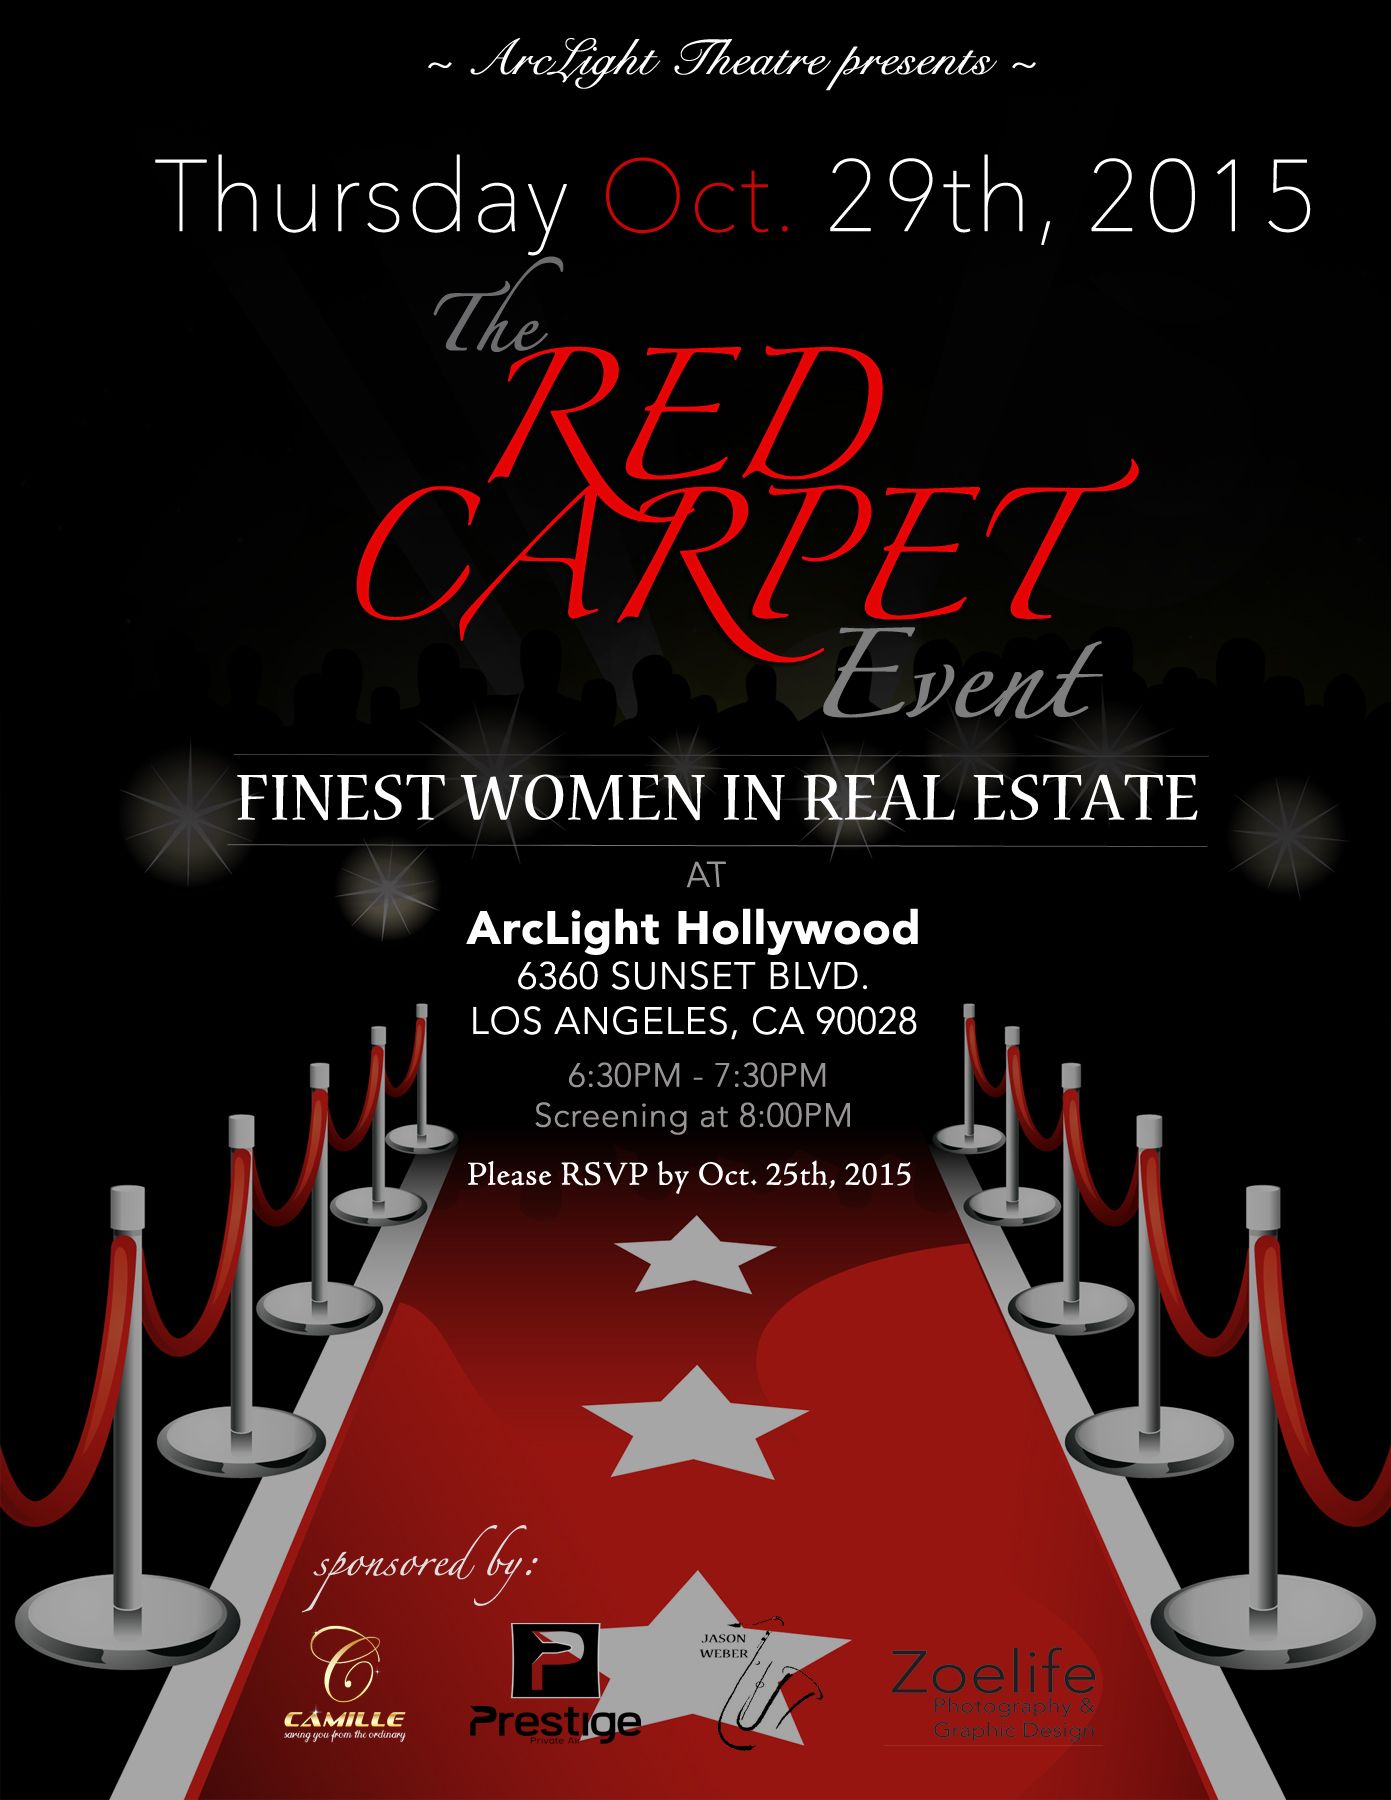 Red Carpet Premier Oct 29, 2015 at Arclight Theater